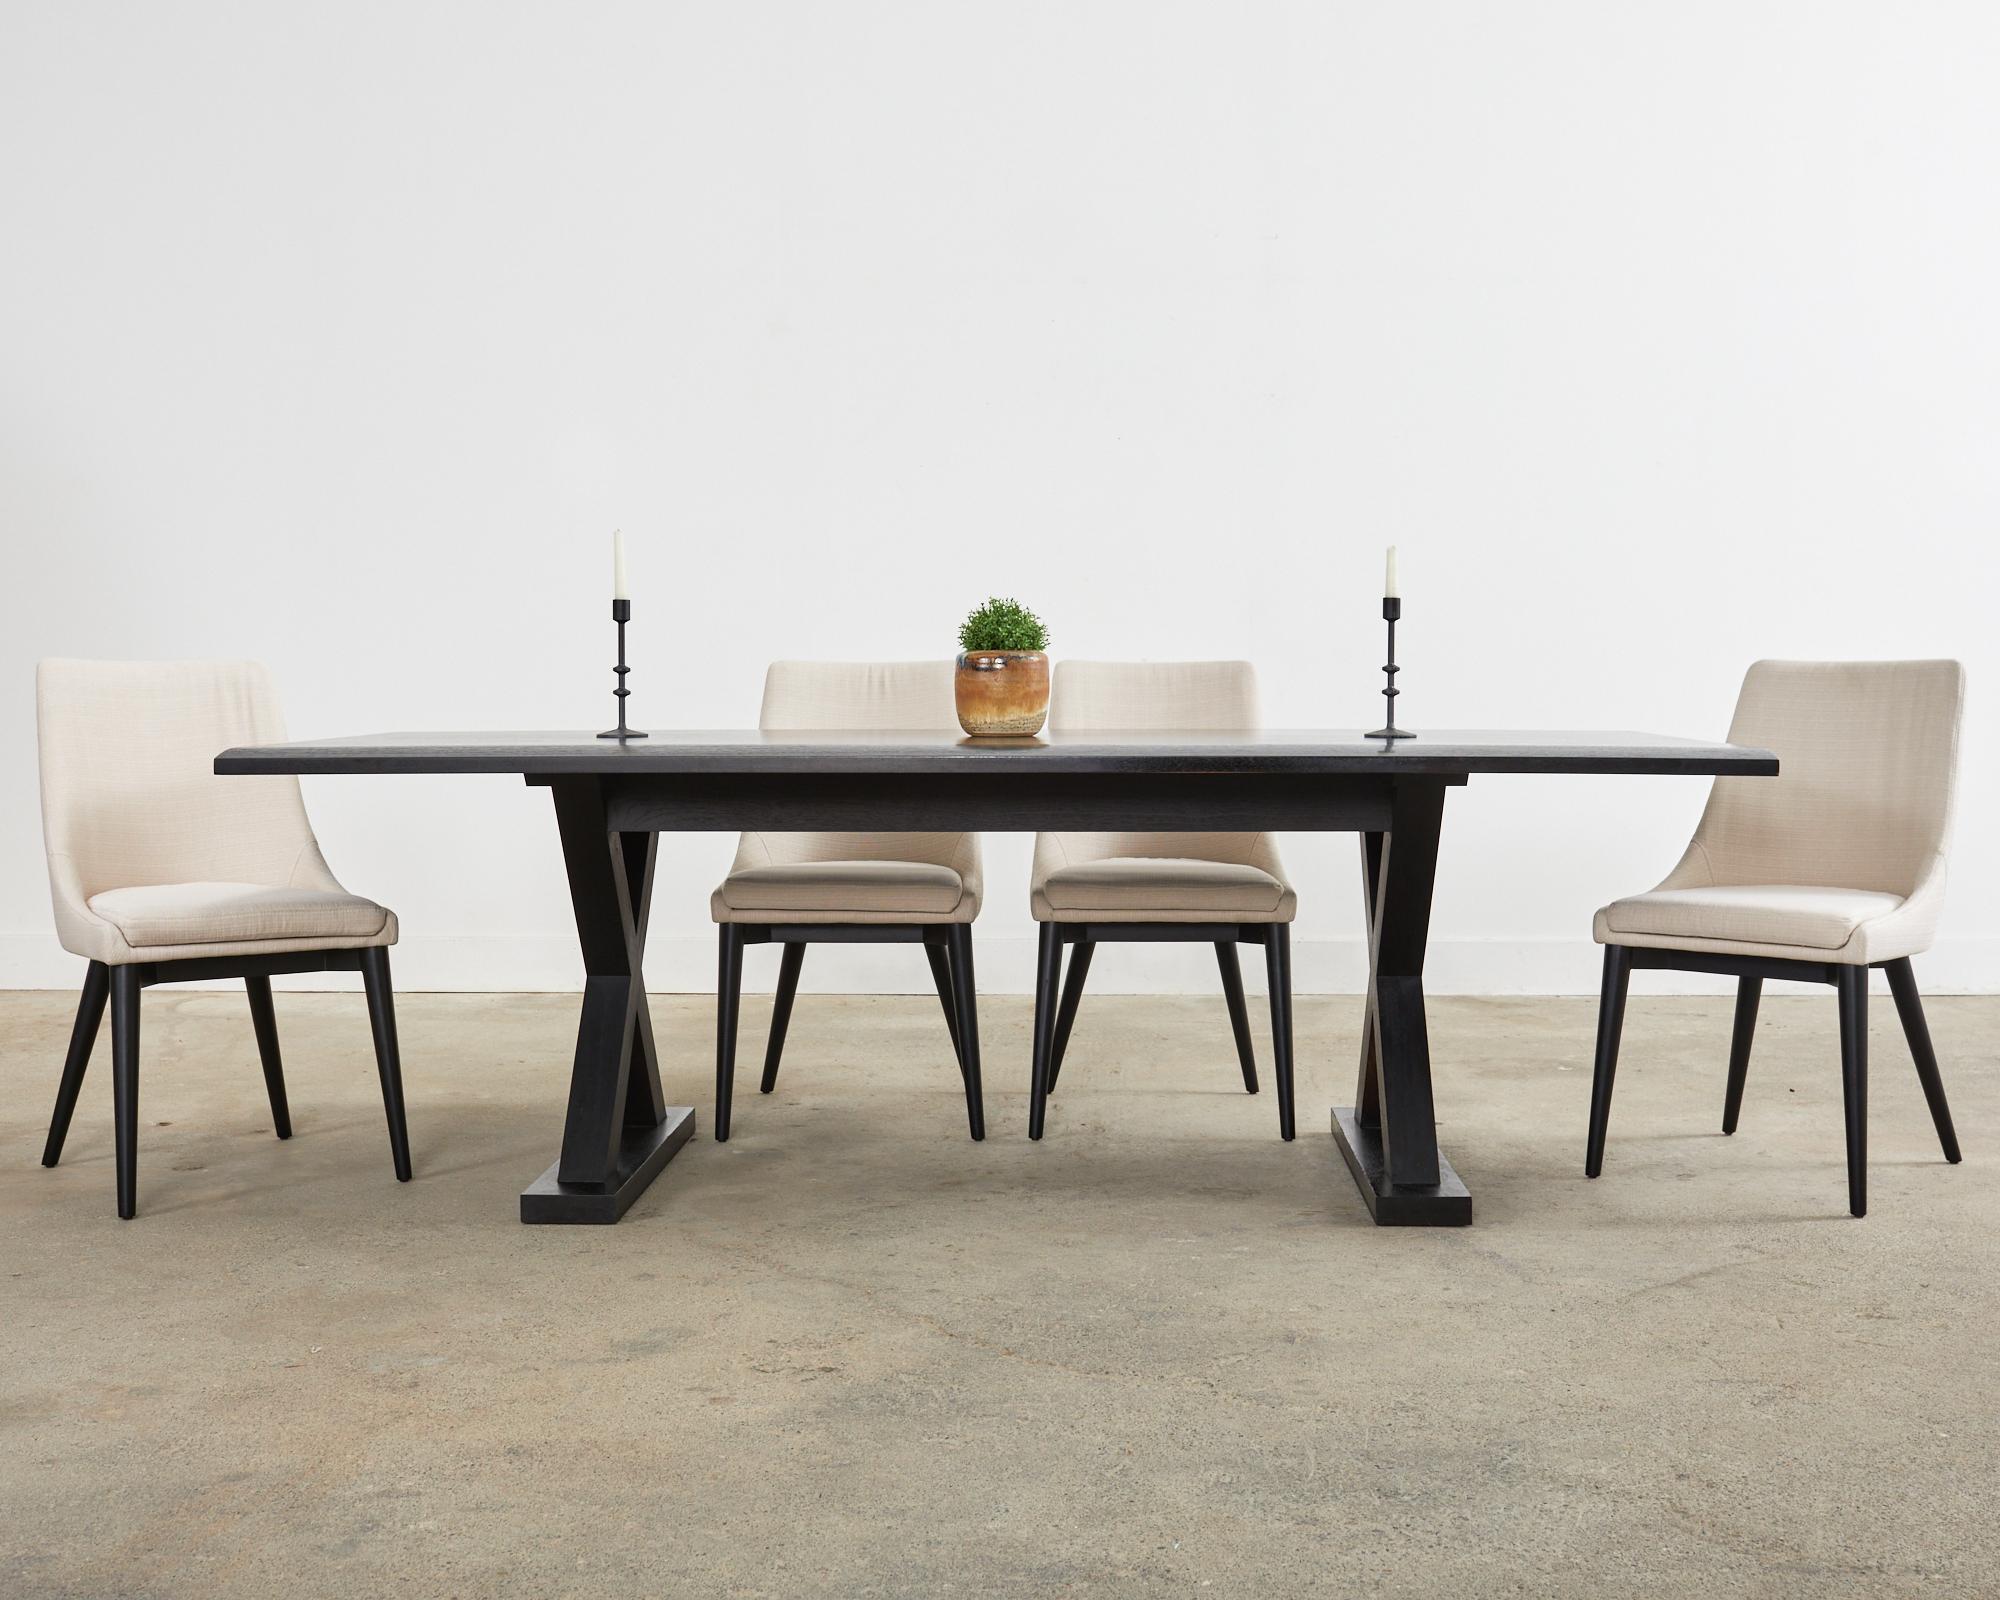 Minimalist modern perfection is Christian Liaigre's interpretation of the farmhouse dining table. The courier table was designed for Holly Hunt and handcrafted from ebonized hardwood oak. The rectangular top measuring 1.5 inches thick features